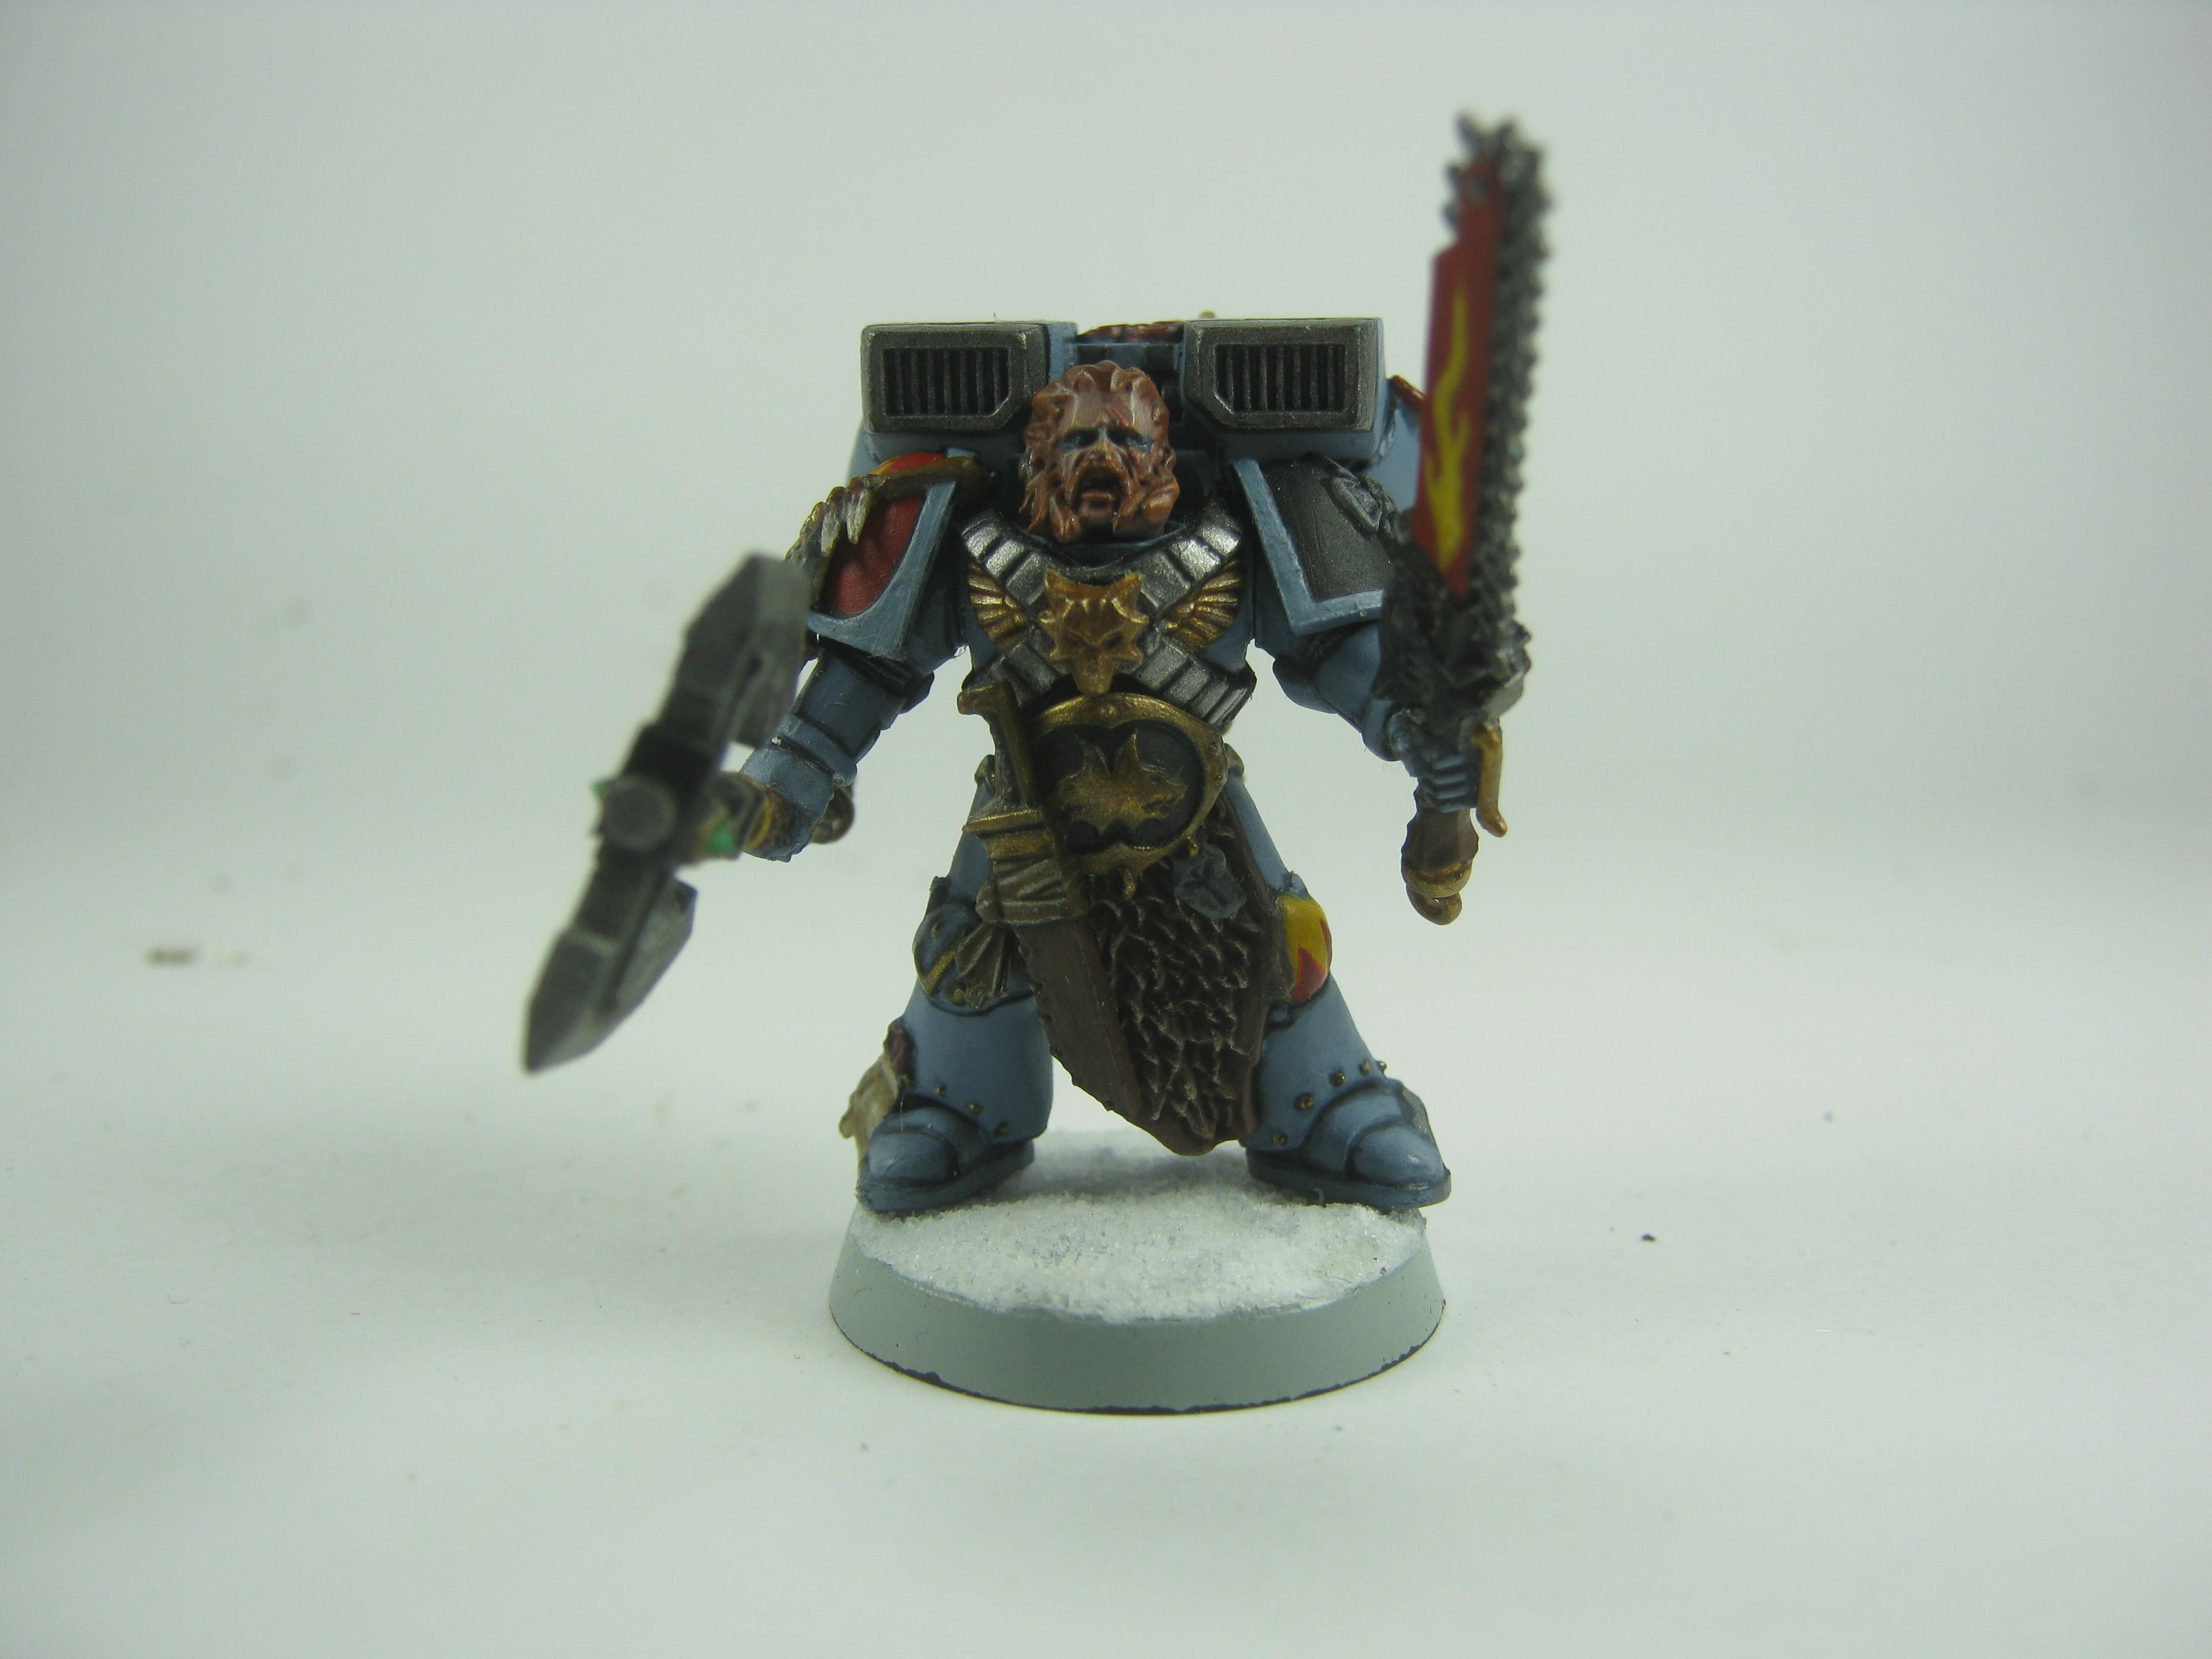 Firehowler, Firehowlers, Skyclaws, Space Wofl Conversion, Space Wolves Conversion, Sven Bloodhowl